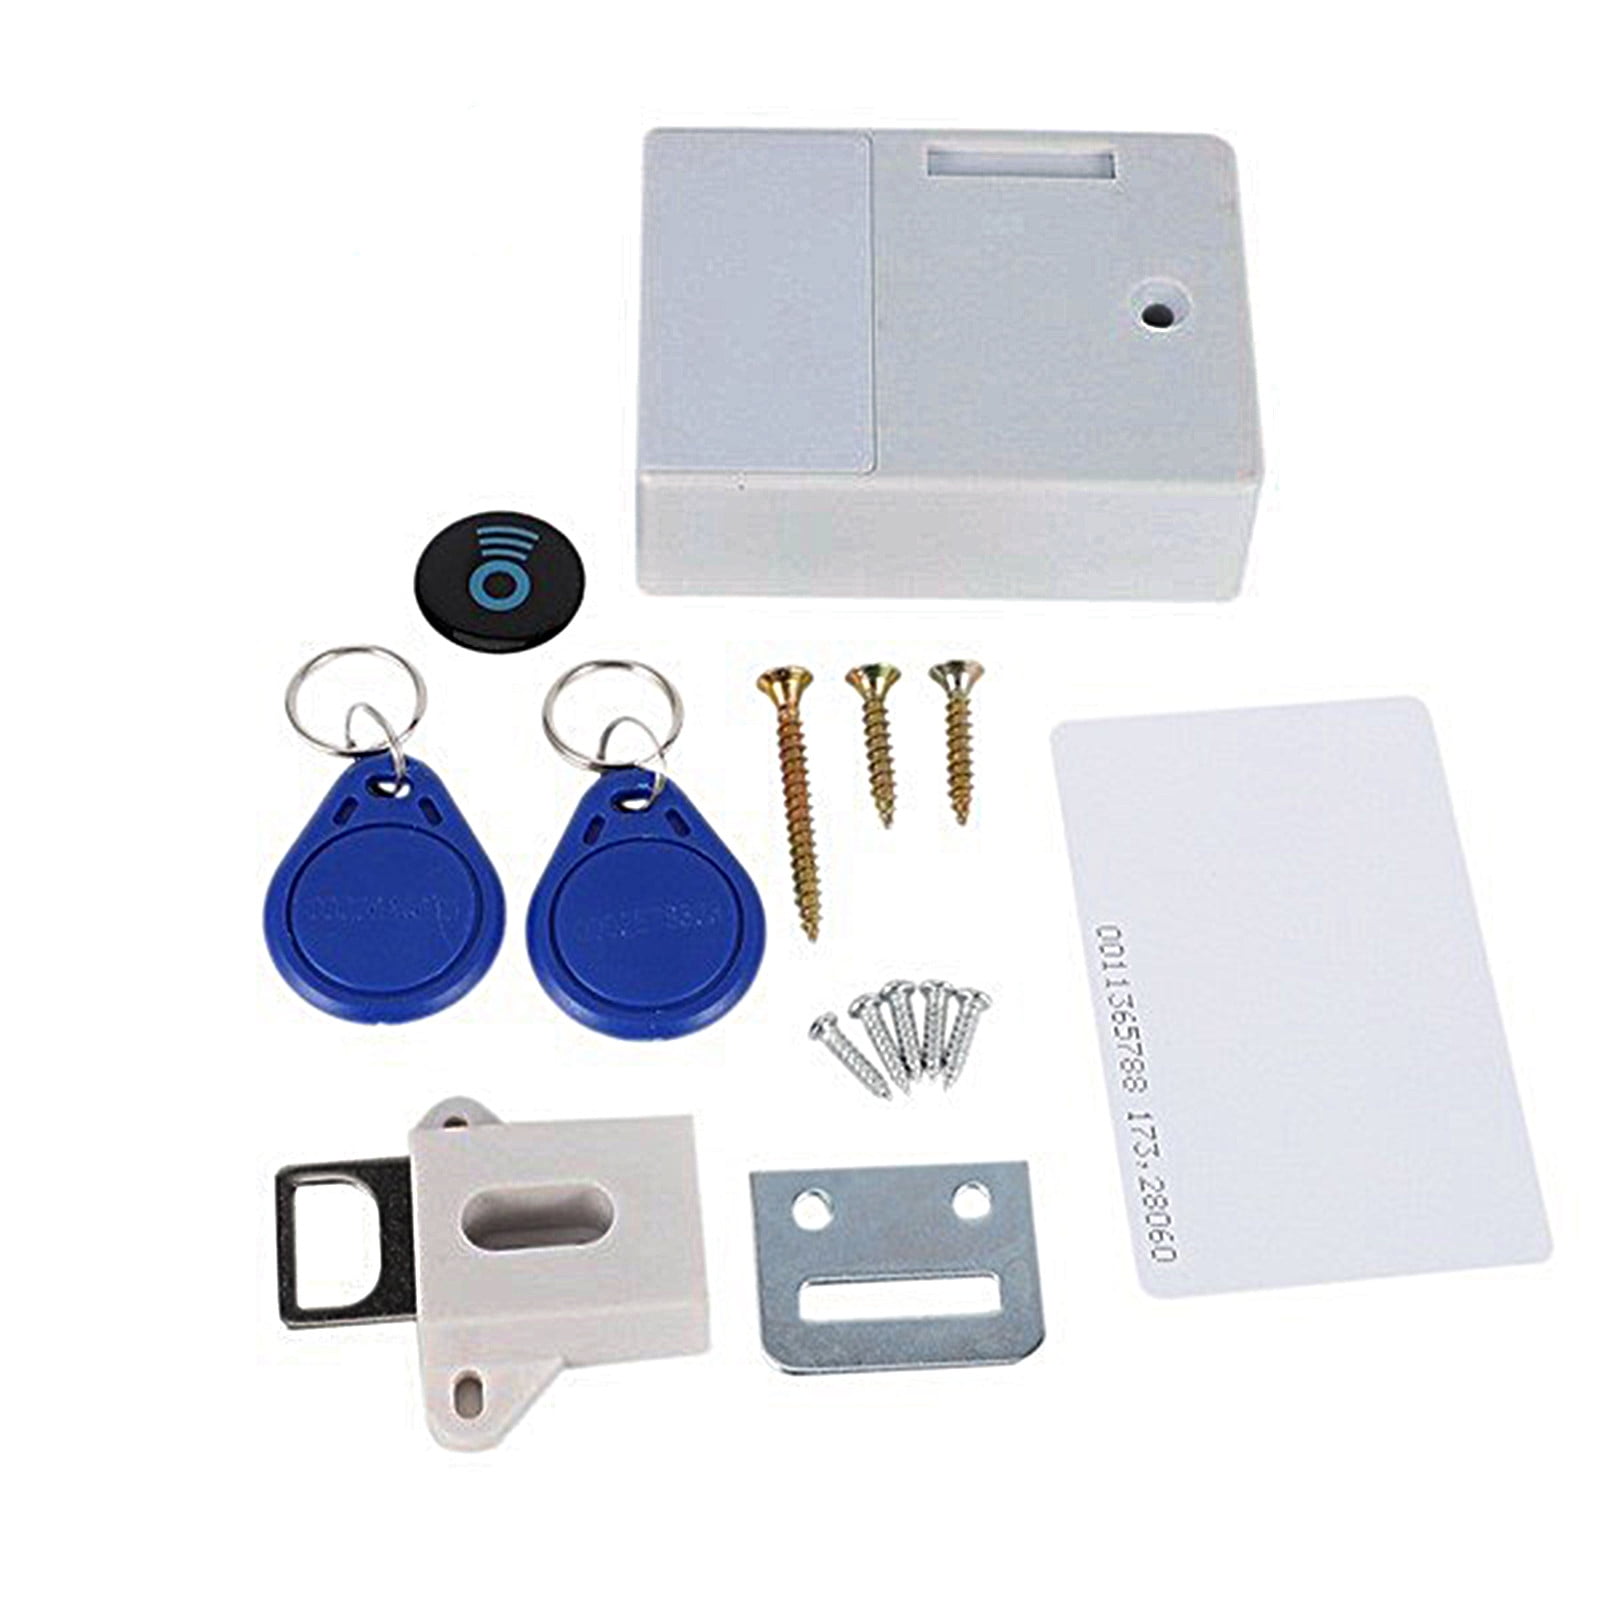 Hidden / Invisible RFID cabinet lock with Key Fob